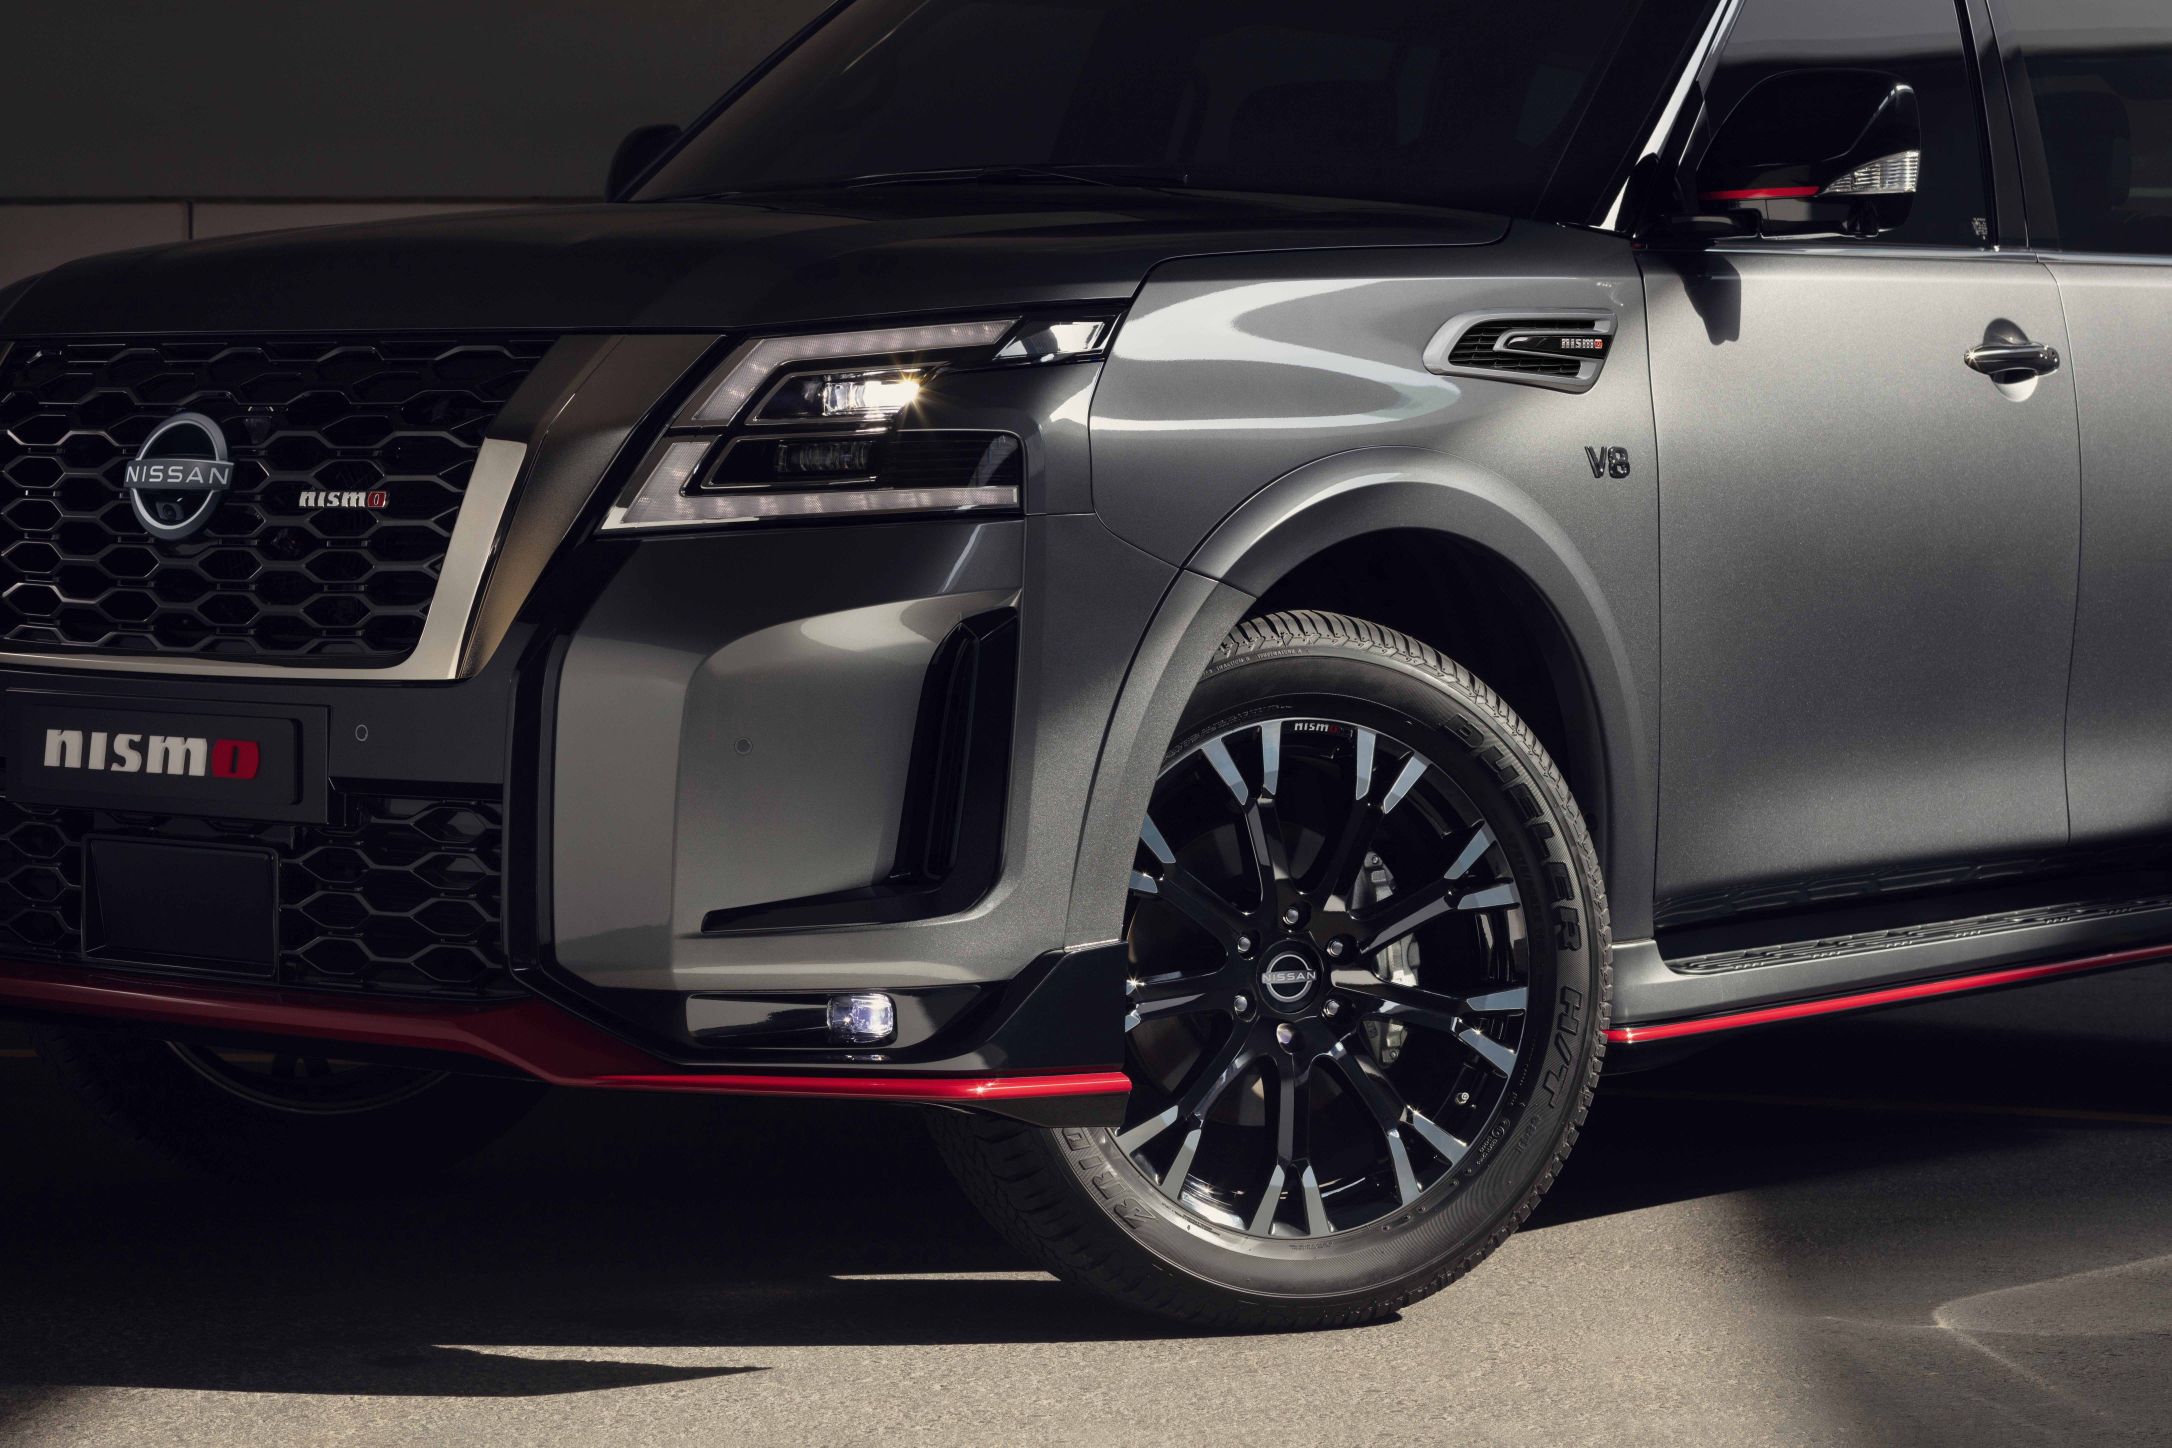 Nissan introduces 2022 Patrol NISMO with race-inspired design and performance